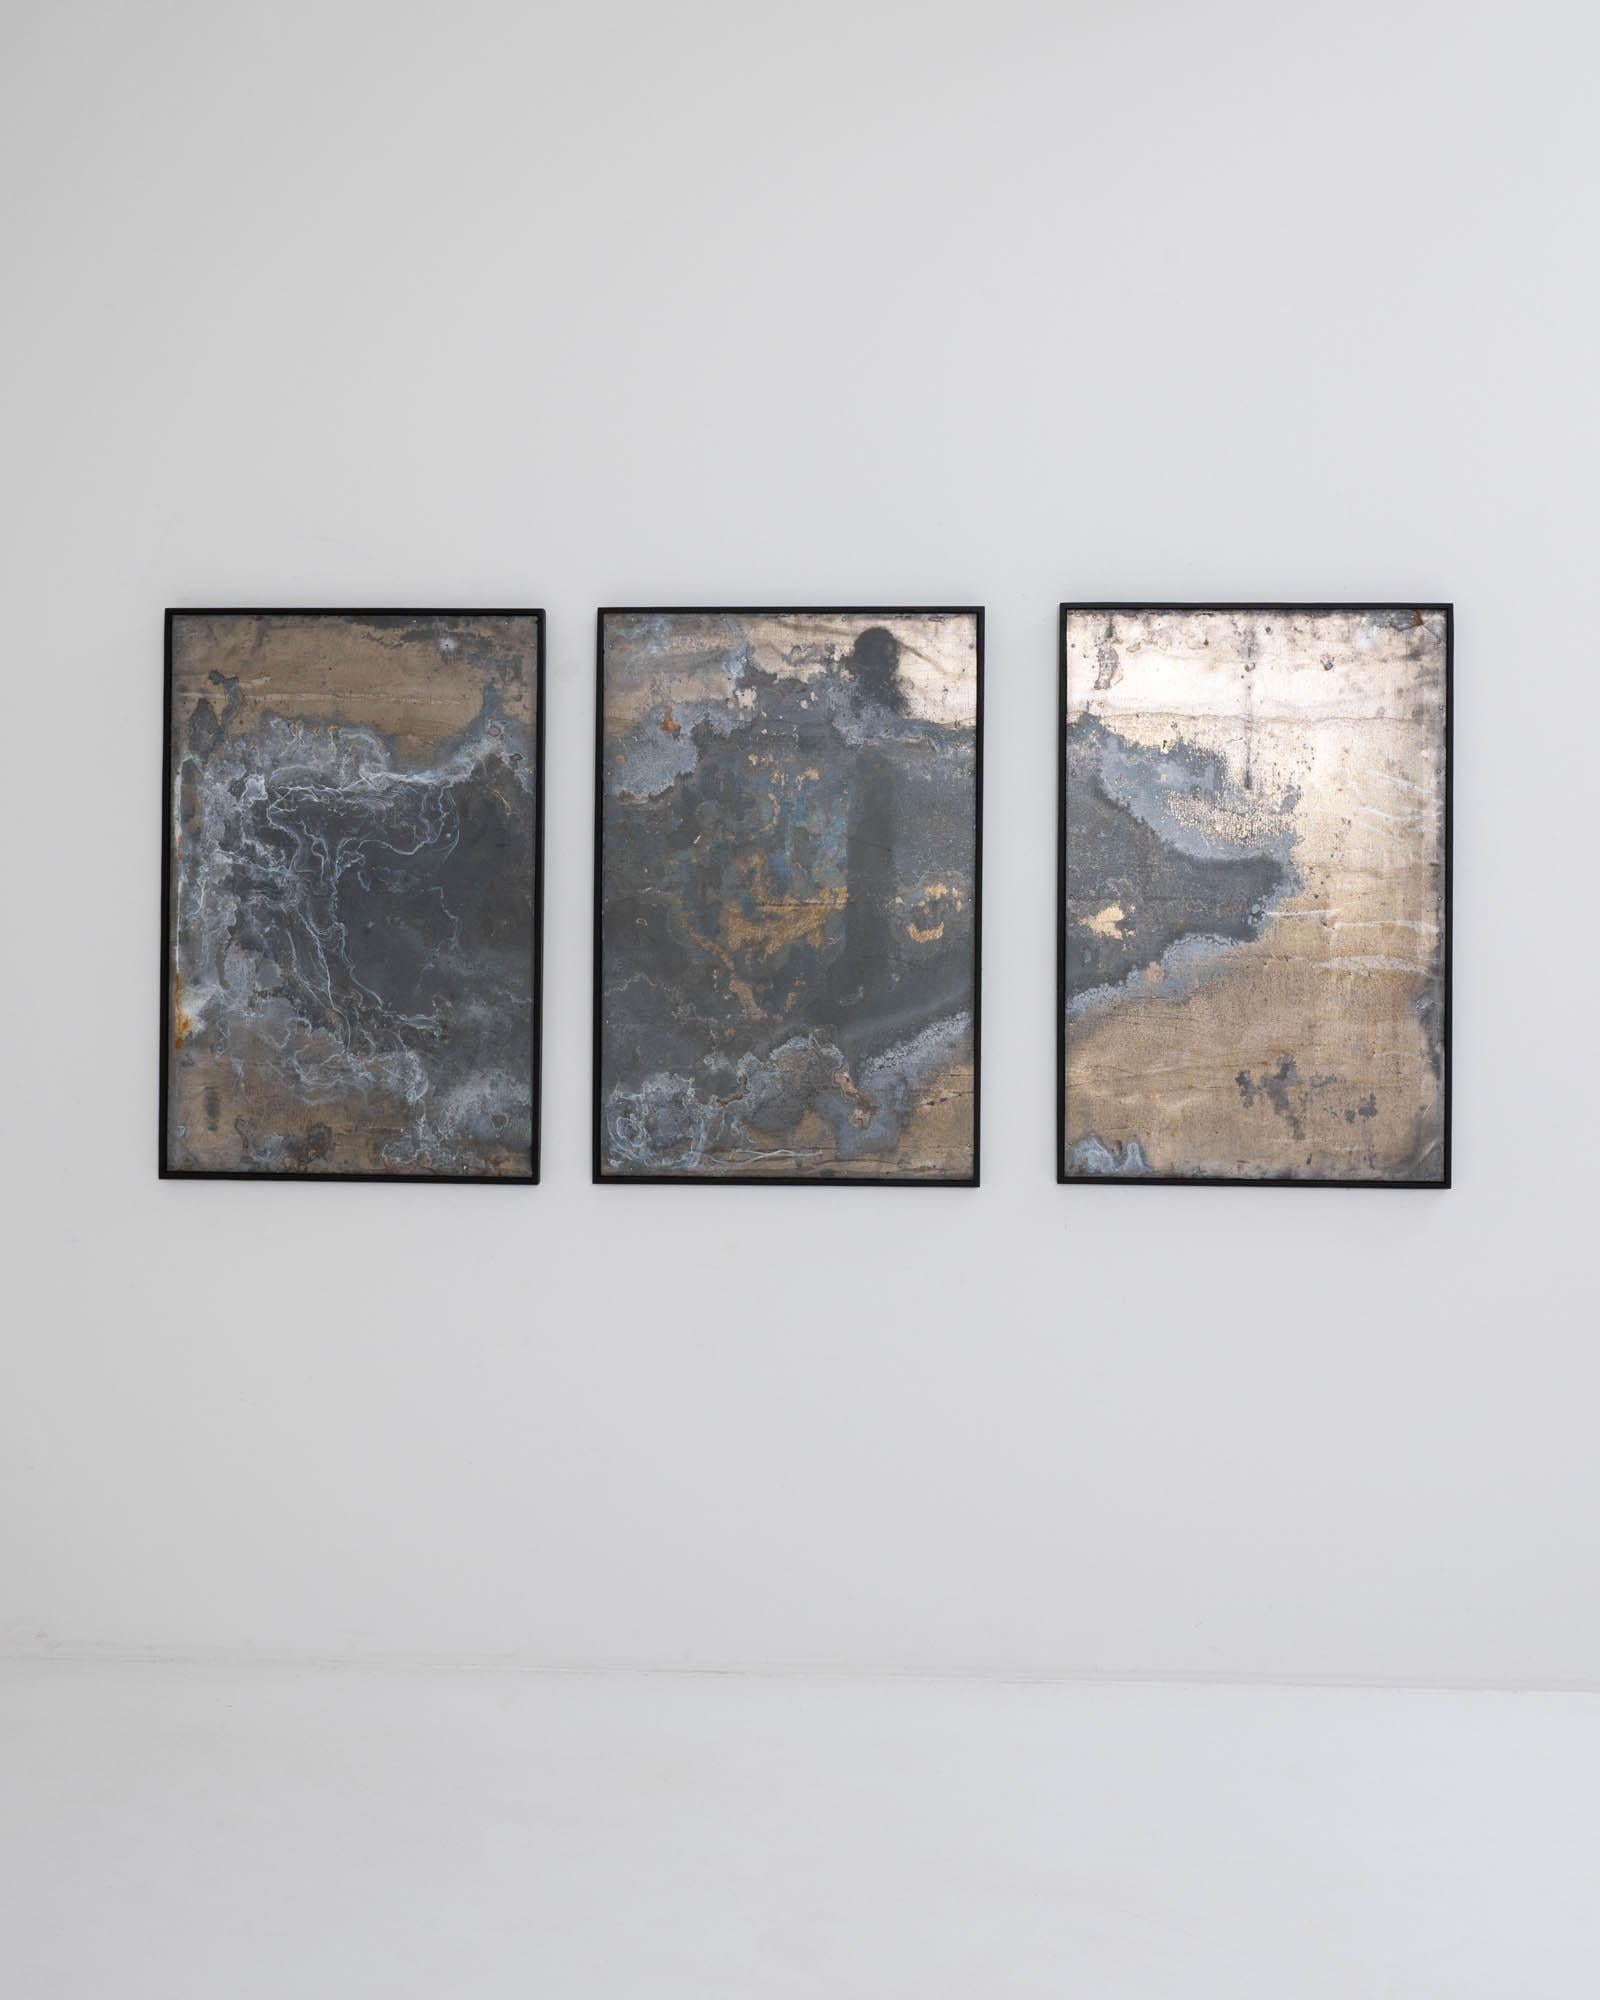 Bold and enigmatic, this large-scale abstract triptych combines the hand of man and the hand of nature. The form has a minimalist simplicity: three sheets of metal are set within black wooden frames. The surface of the metal combines human